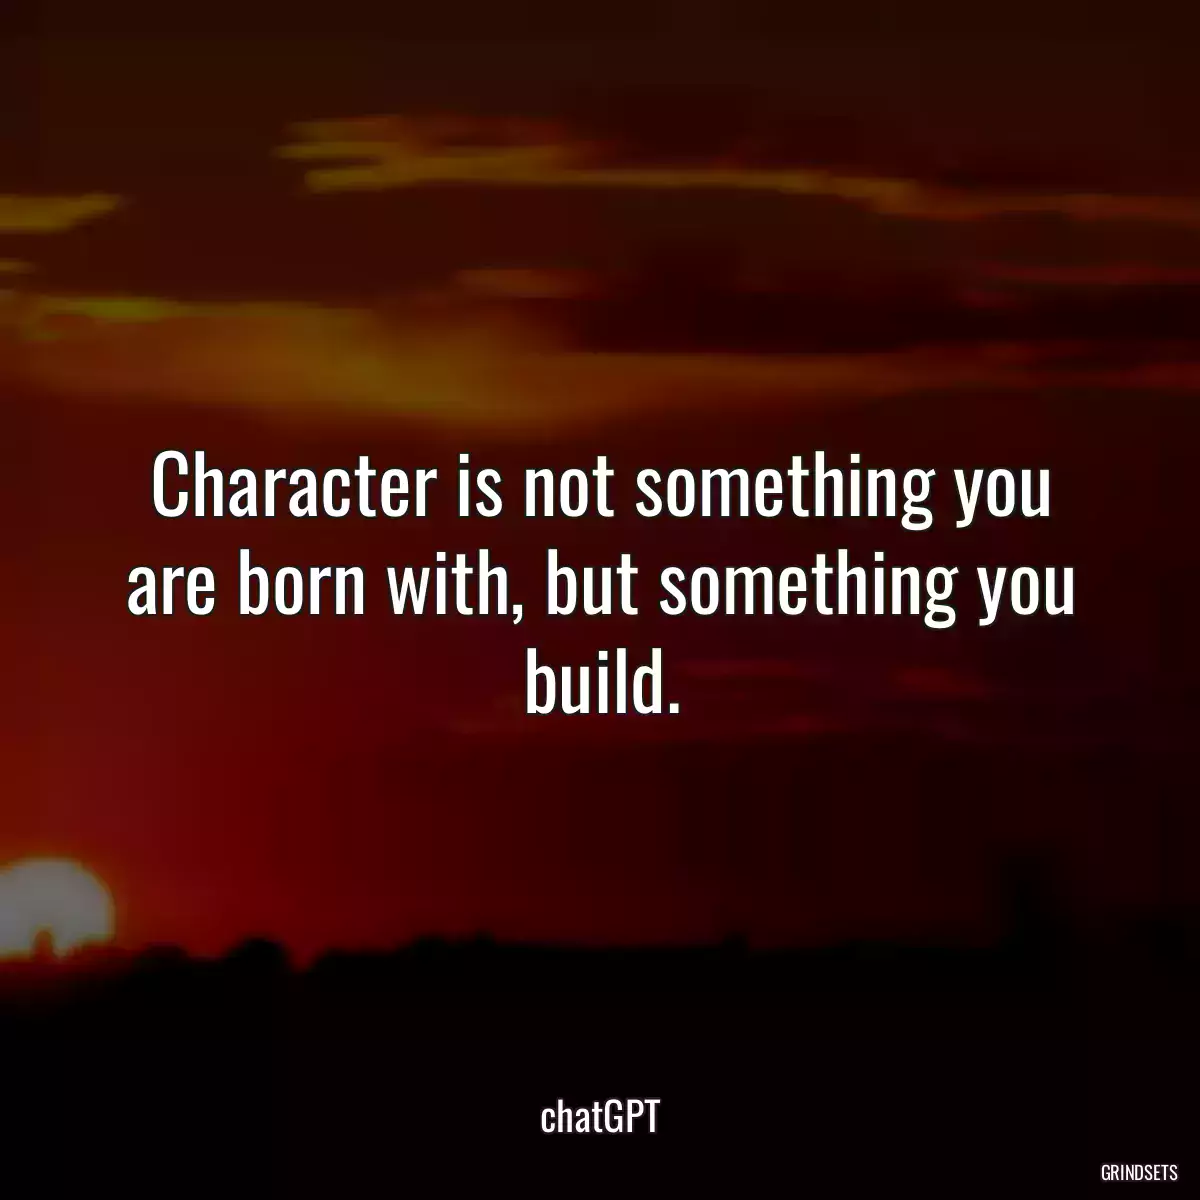 Character is not something you are born with, but something you build.